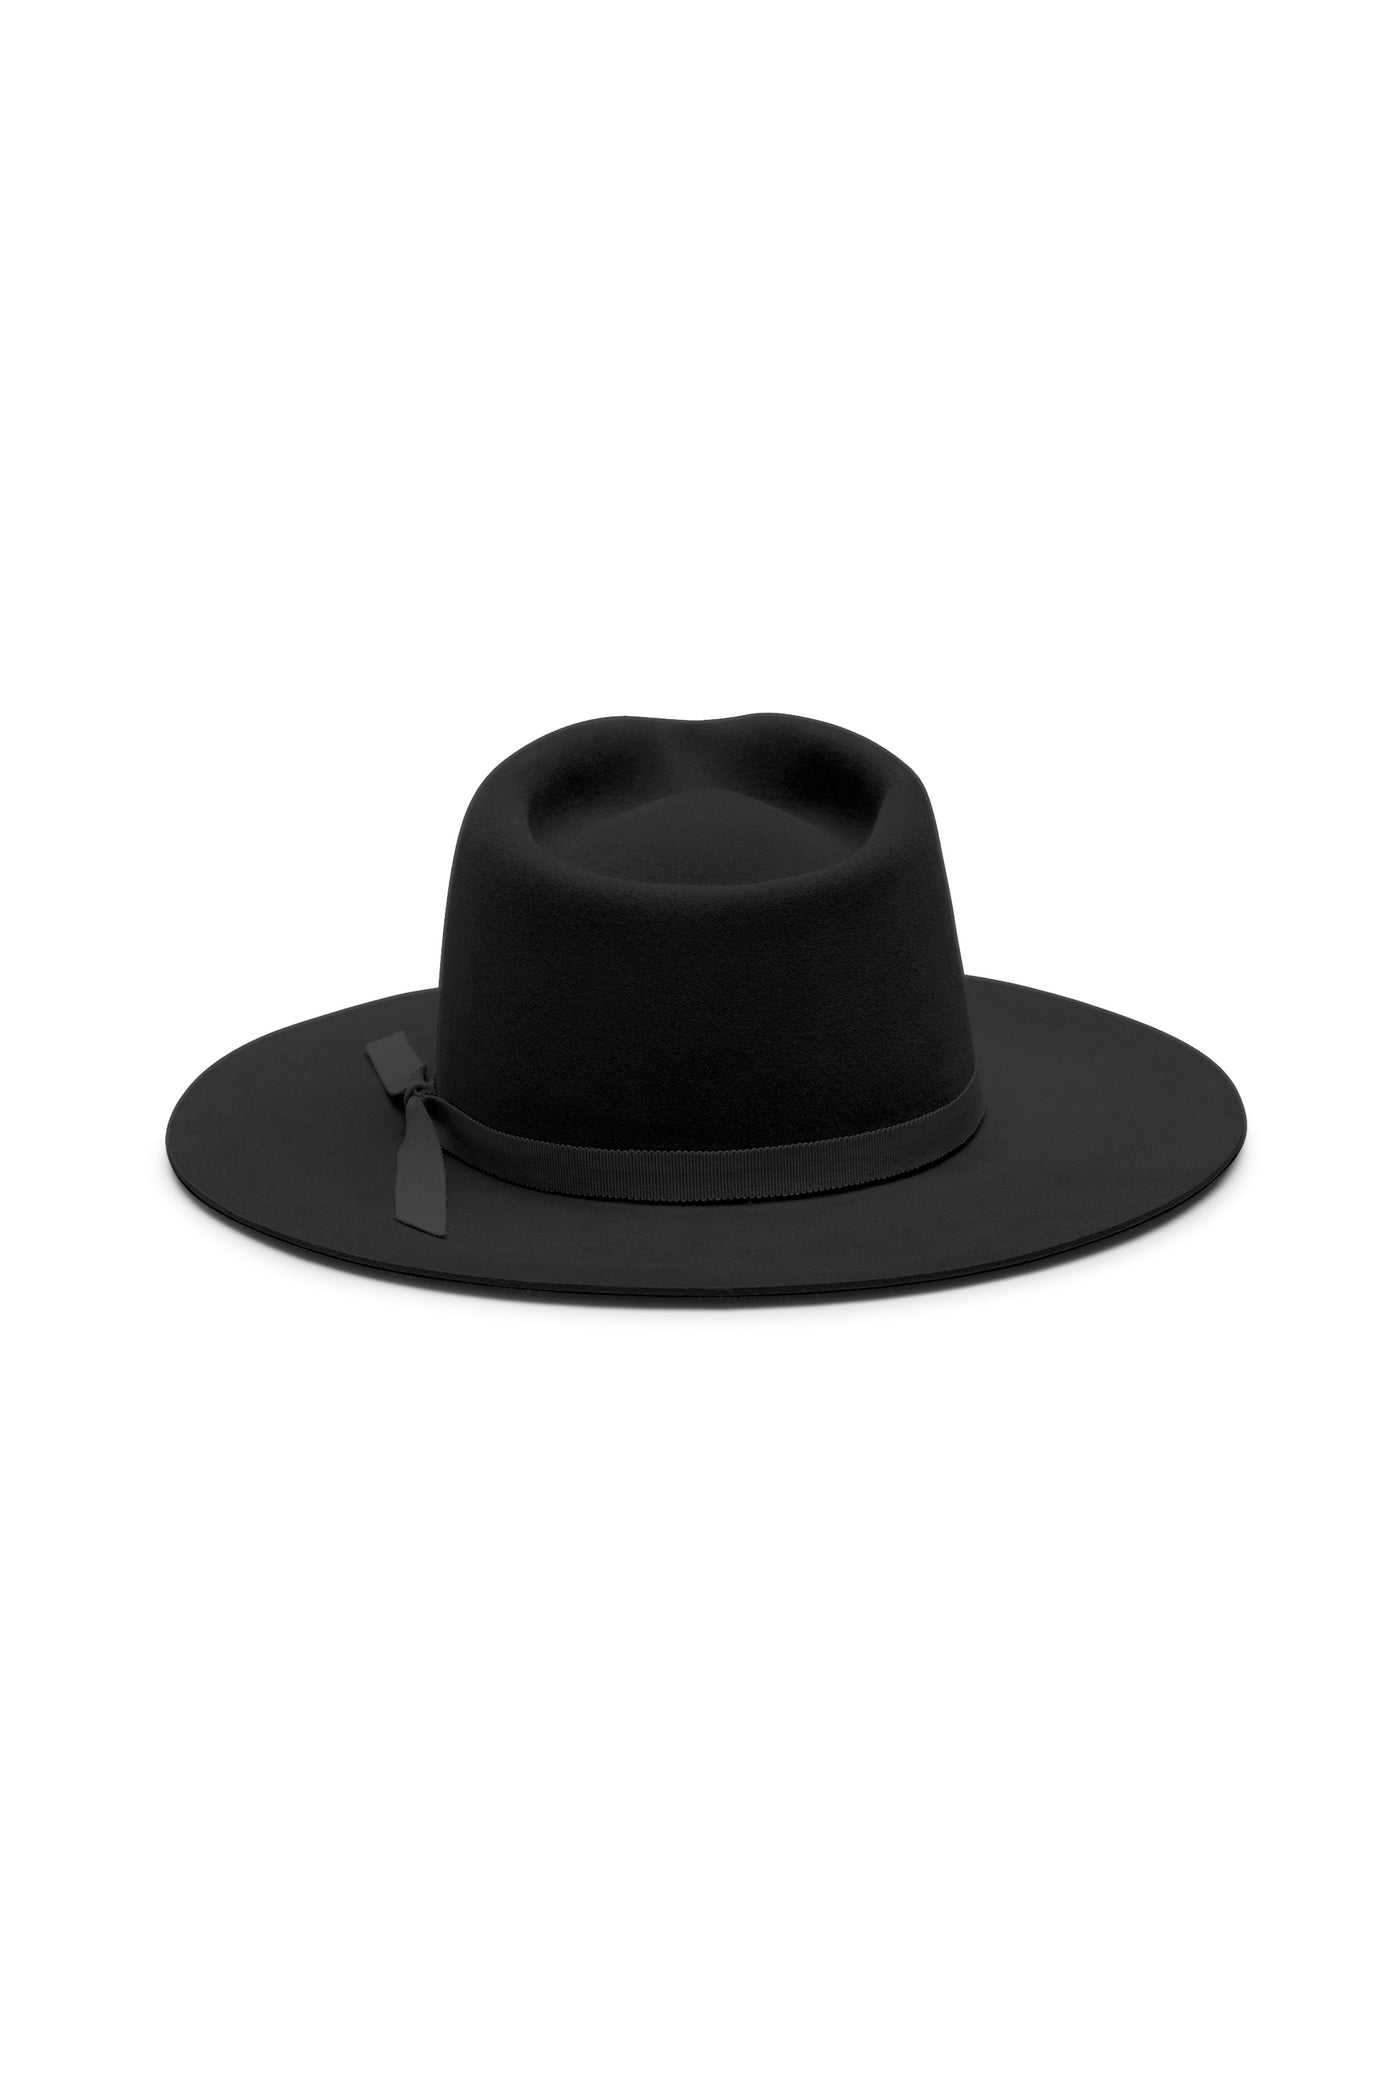 Black 100% fur felt fedora hat with a wide brim, black ribbon and tear drop crown. Unisex hat style in various sizes and colors. We ship worldwide. Shop now. Each SoonNoon hat is handmade with unique character in Stockholm, Sweden.